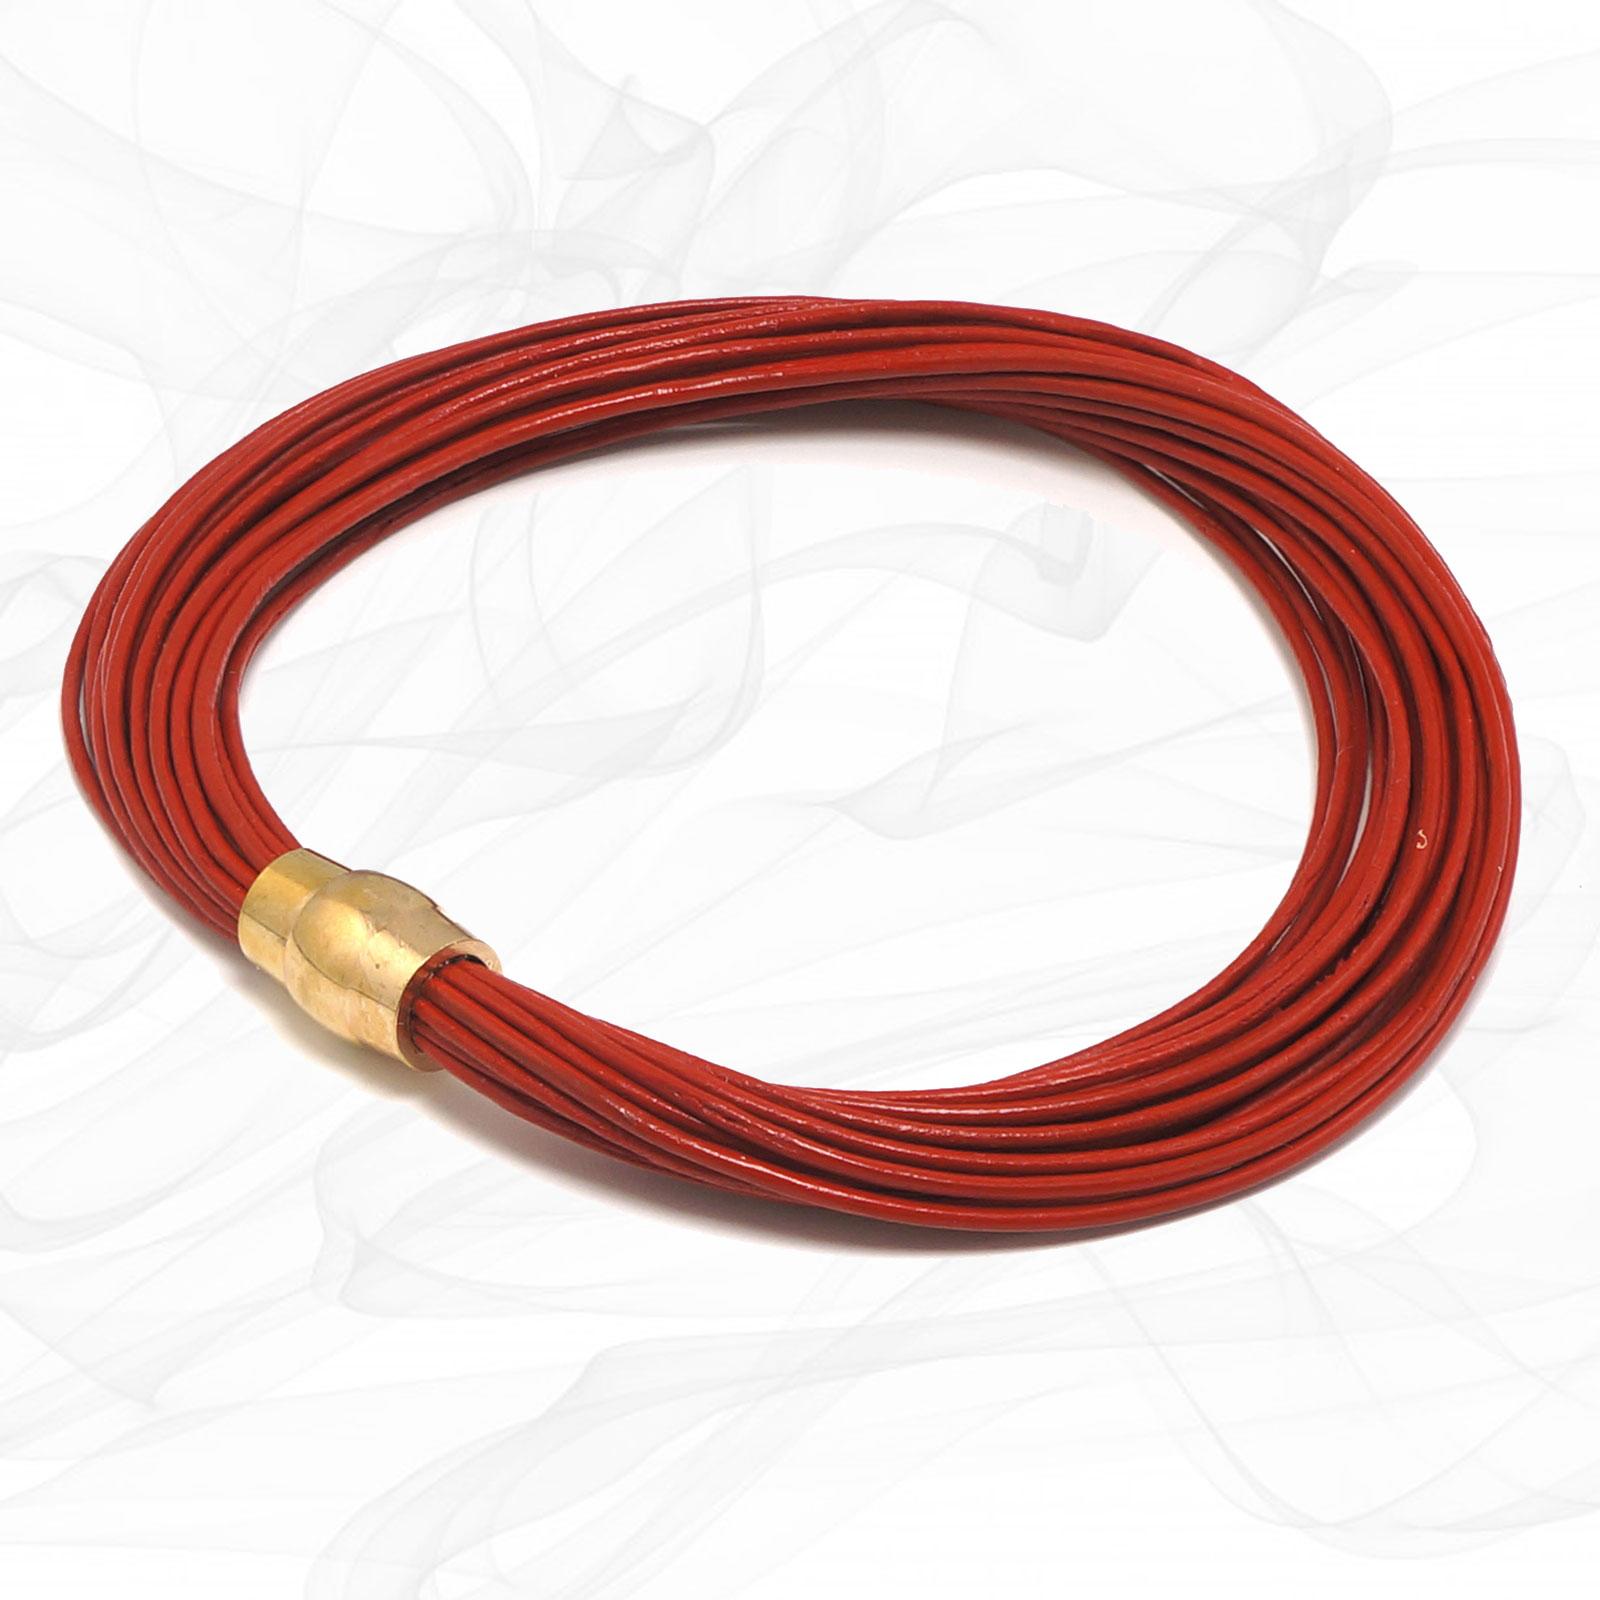 Red Multi Strand Leather Bracelet for Women, one size, Limited Edition. With a Gold Steel Magnetic Clasp.